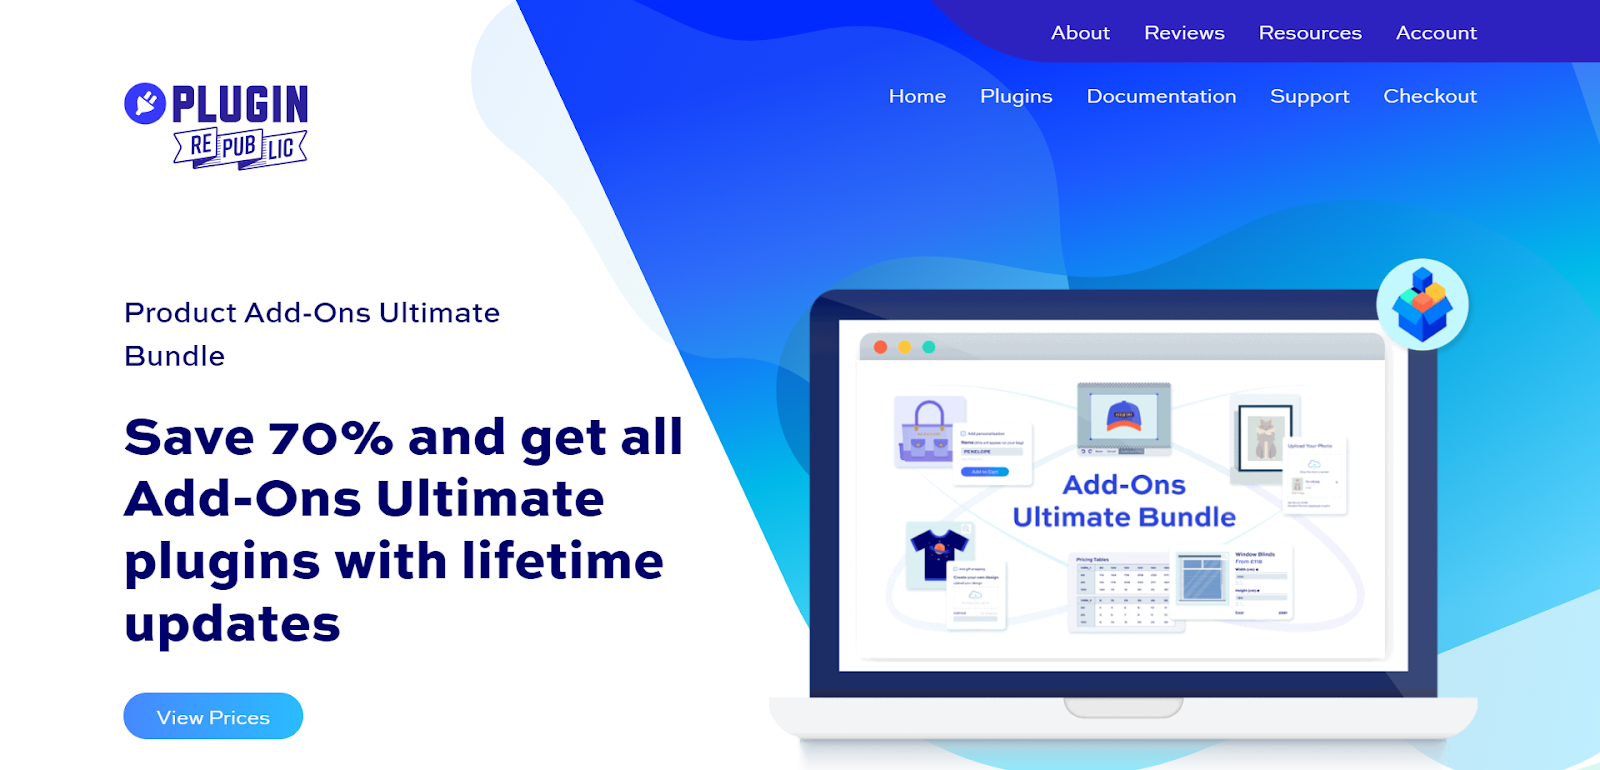 Product Add-Ons Ultimate Bundle